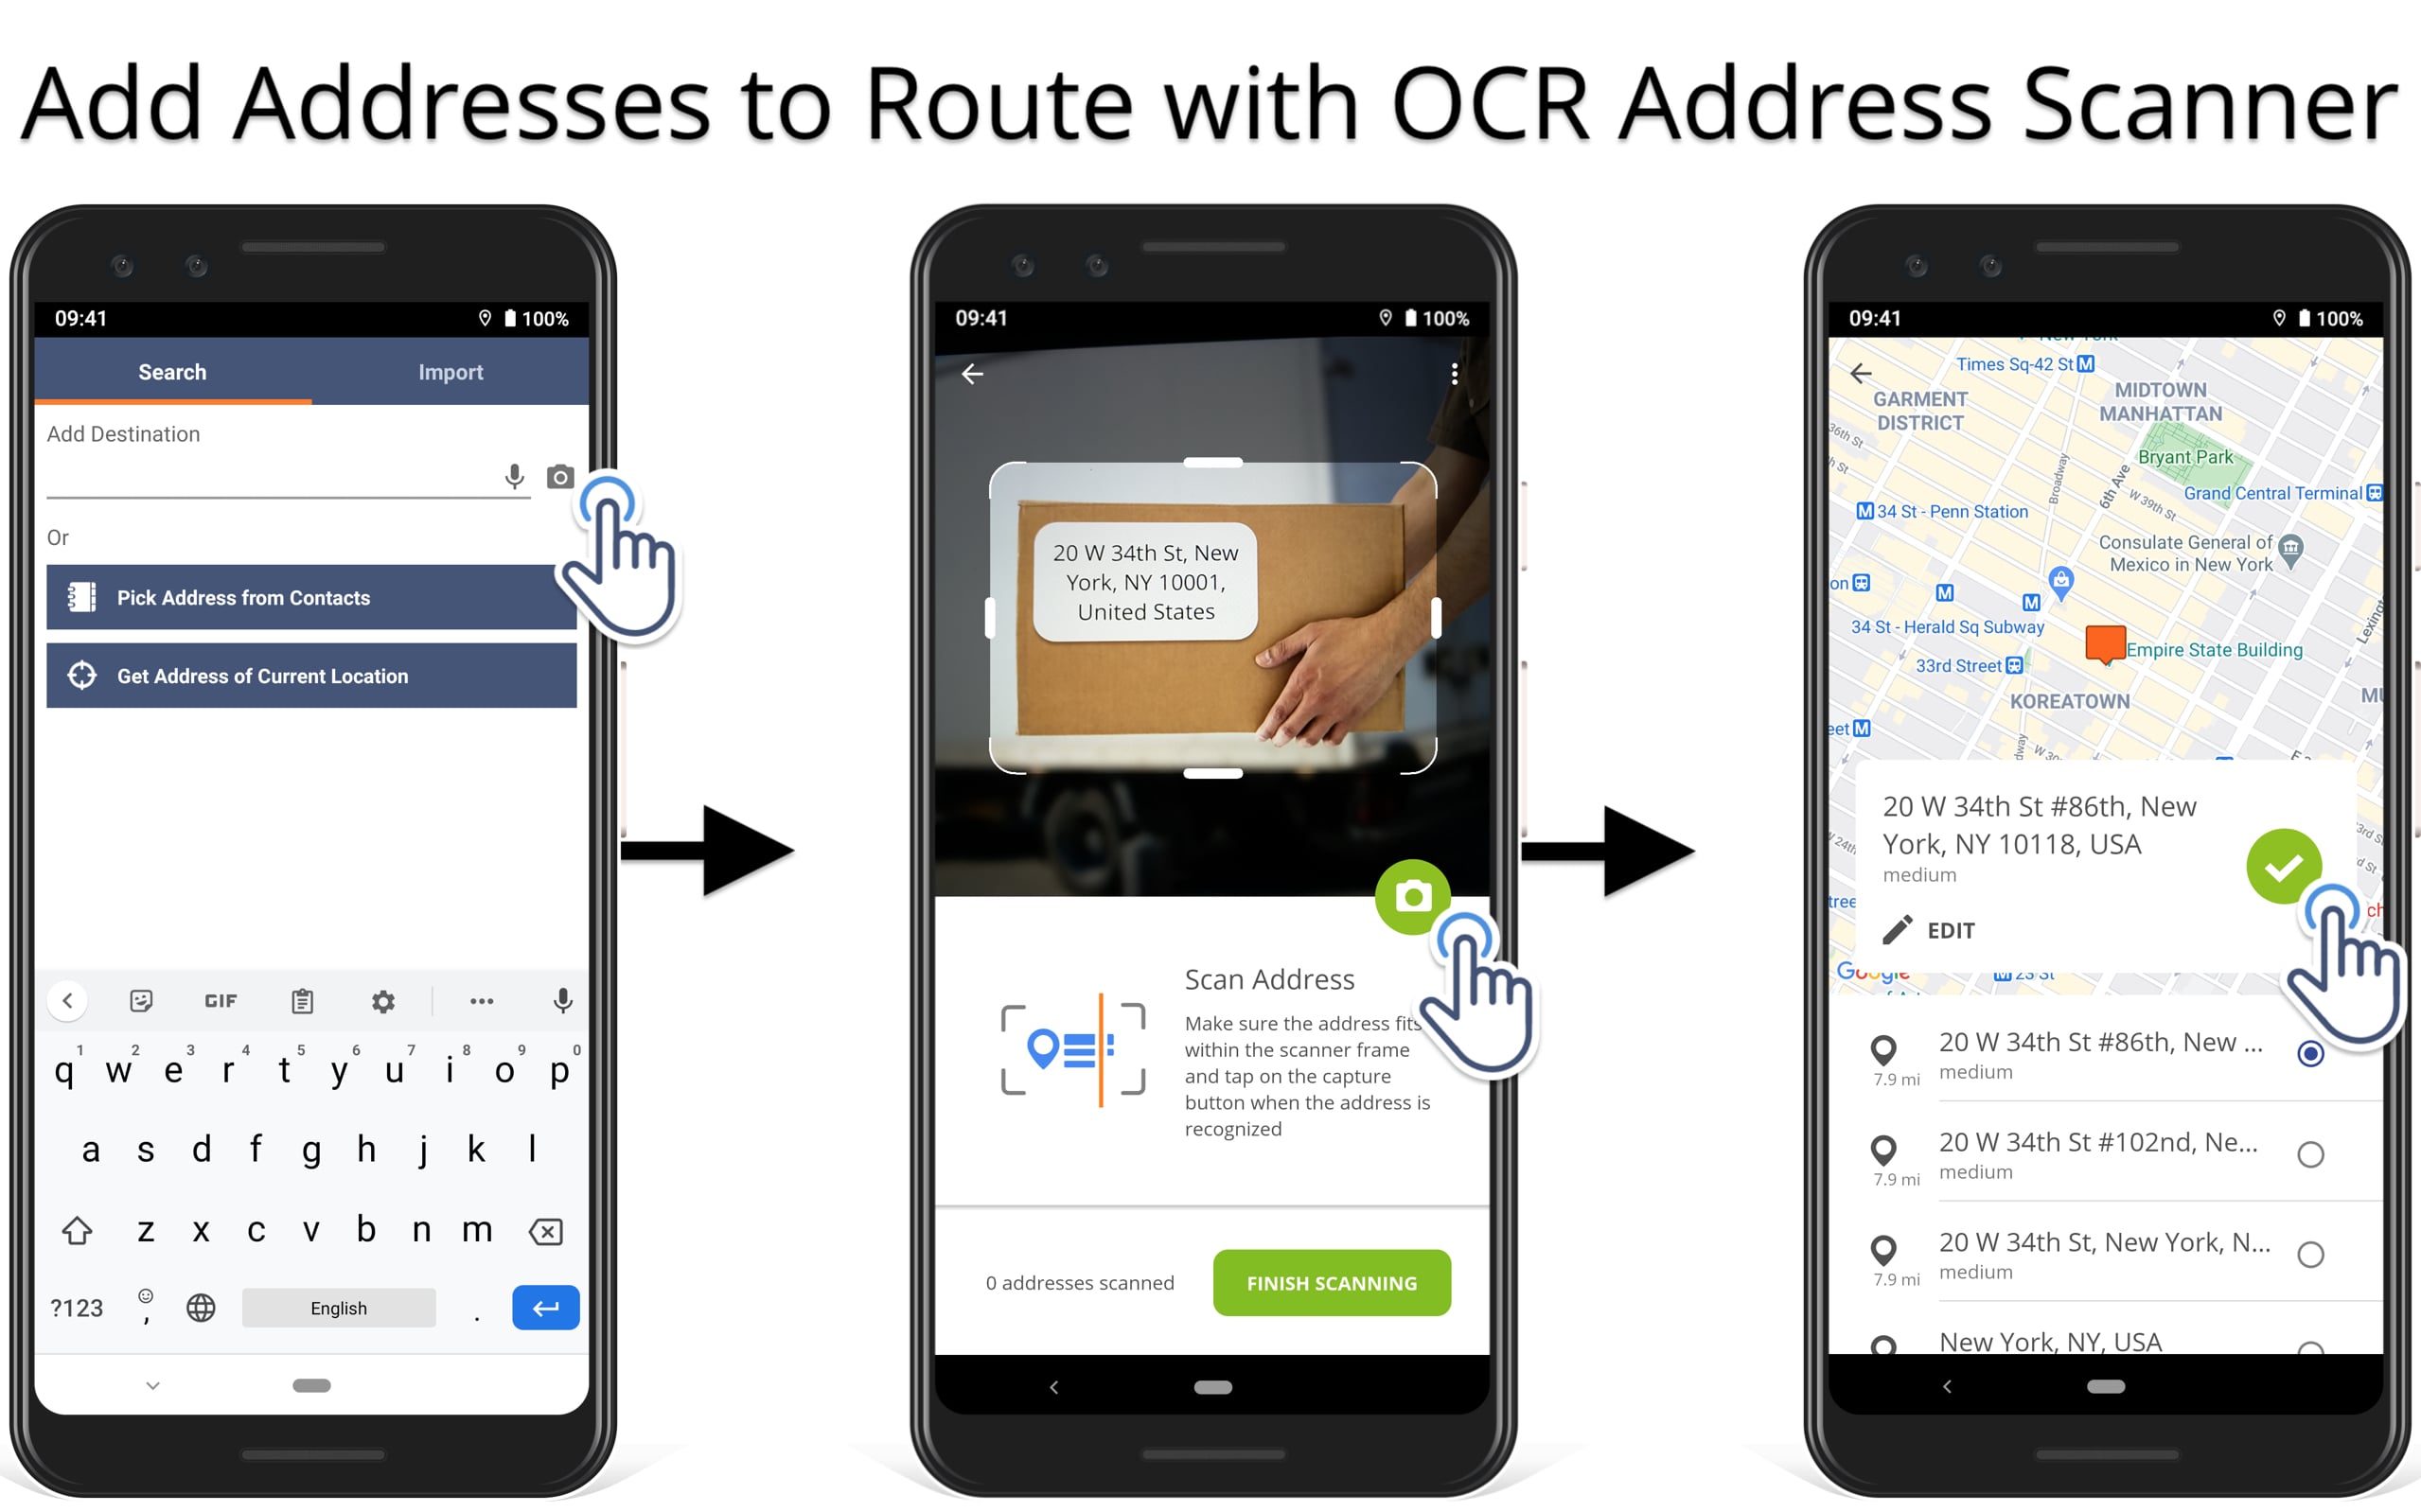 OCR address scanner scans addresses on labels to add them as destinations to the route